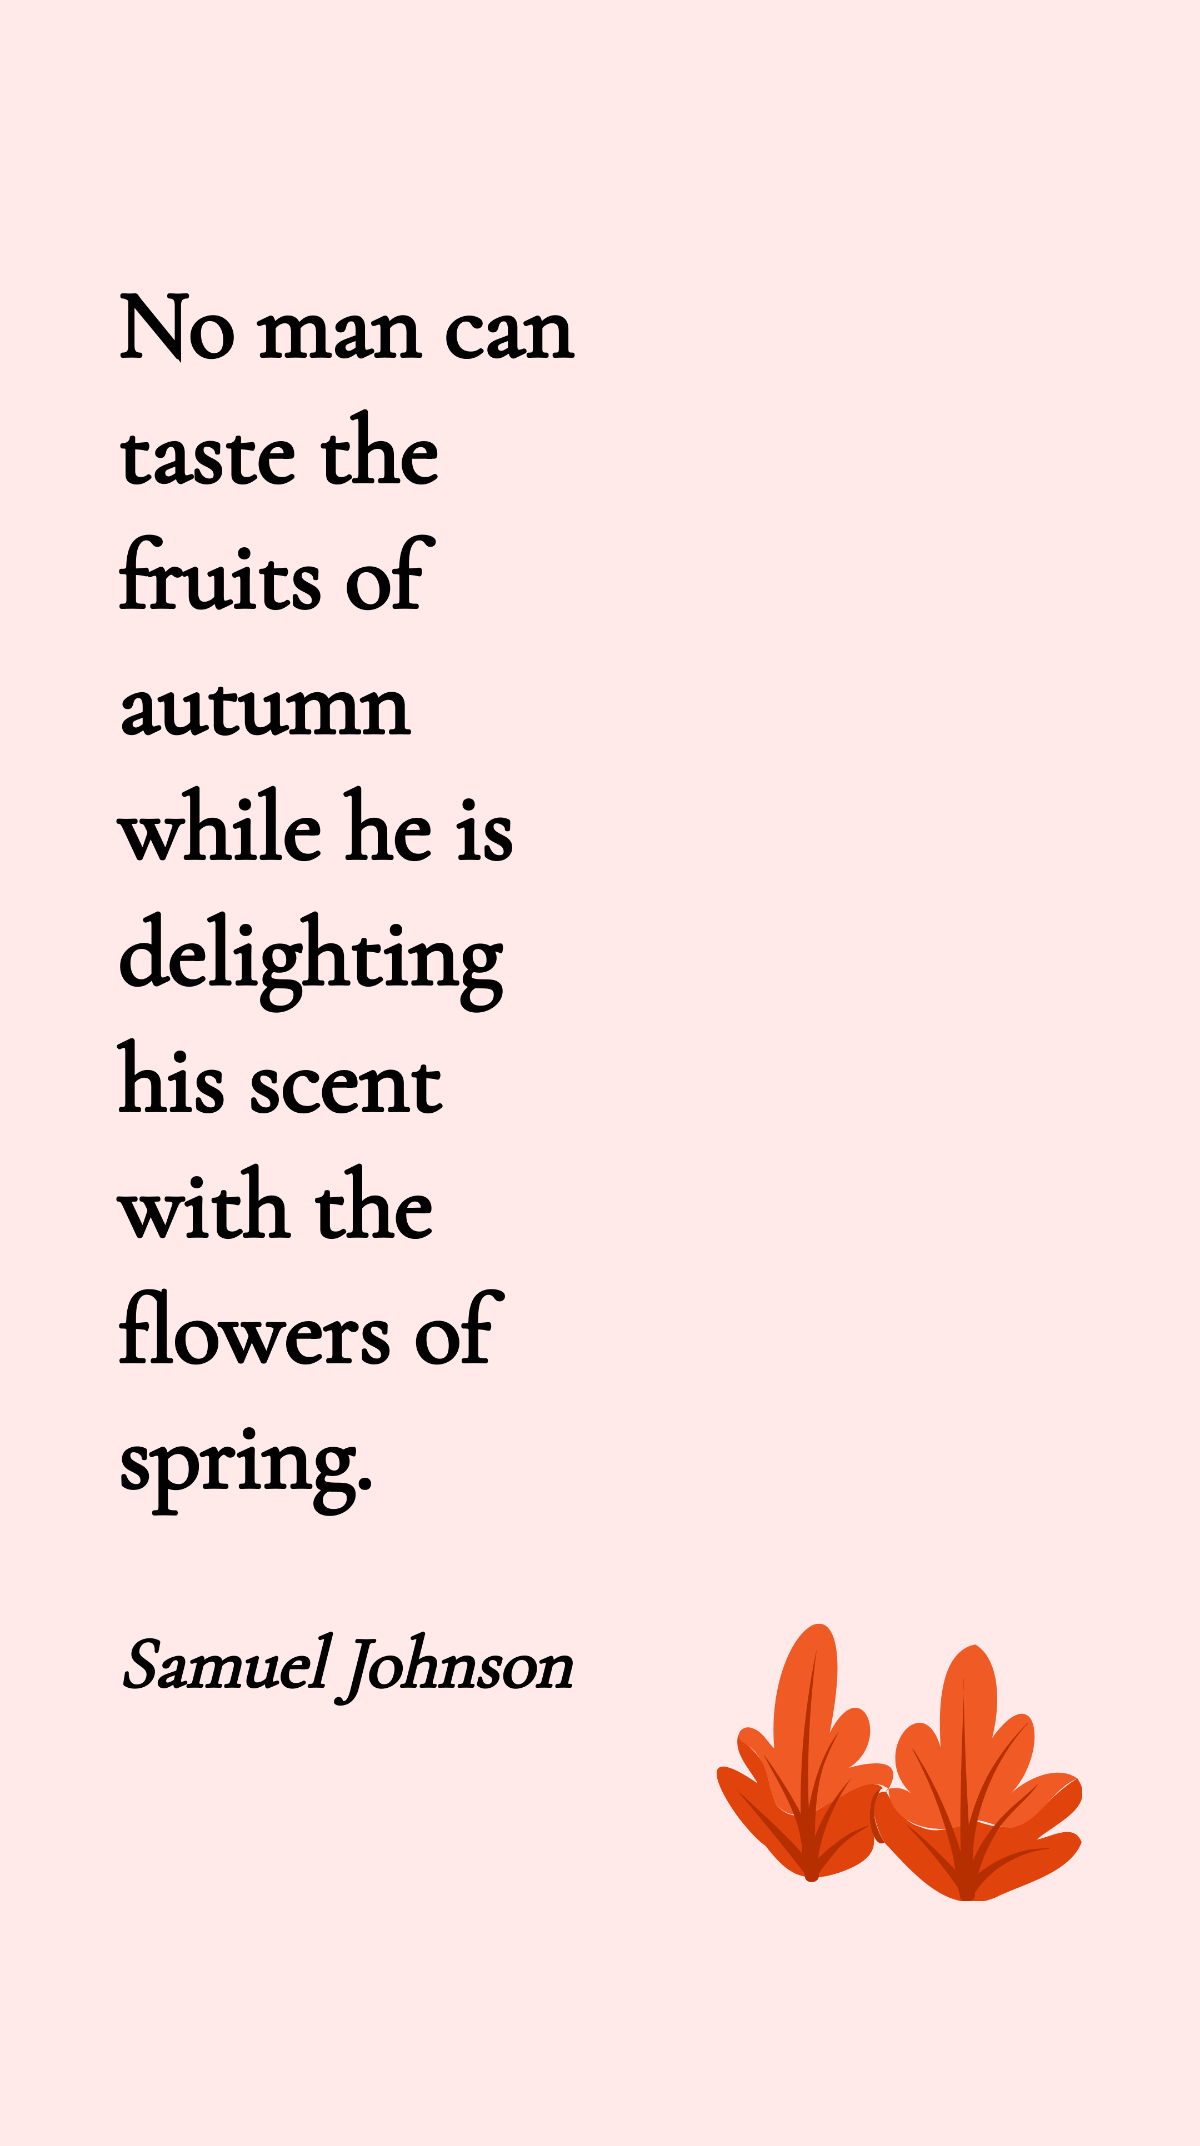 Samuel Johnson - No man can taste the fruits of autumn while he is delighting his scent with the flowers of spring. Template